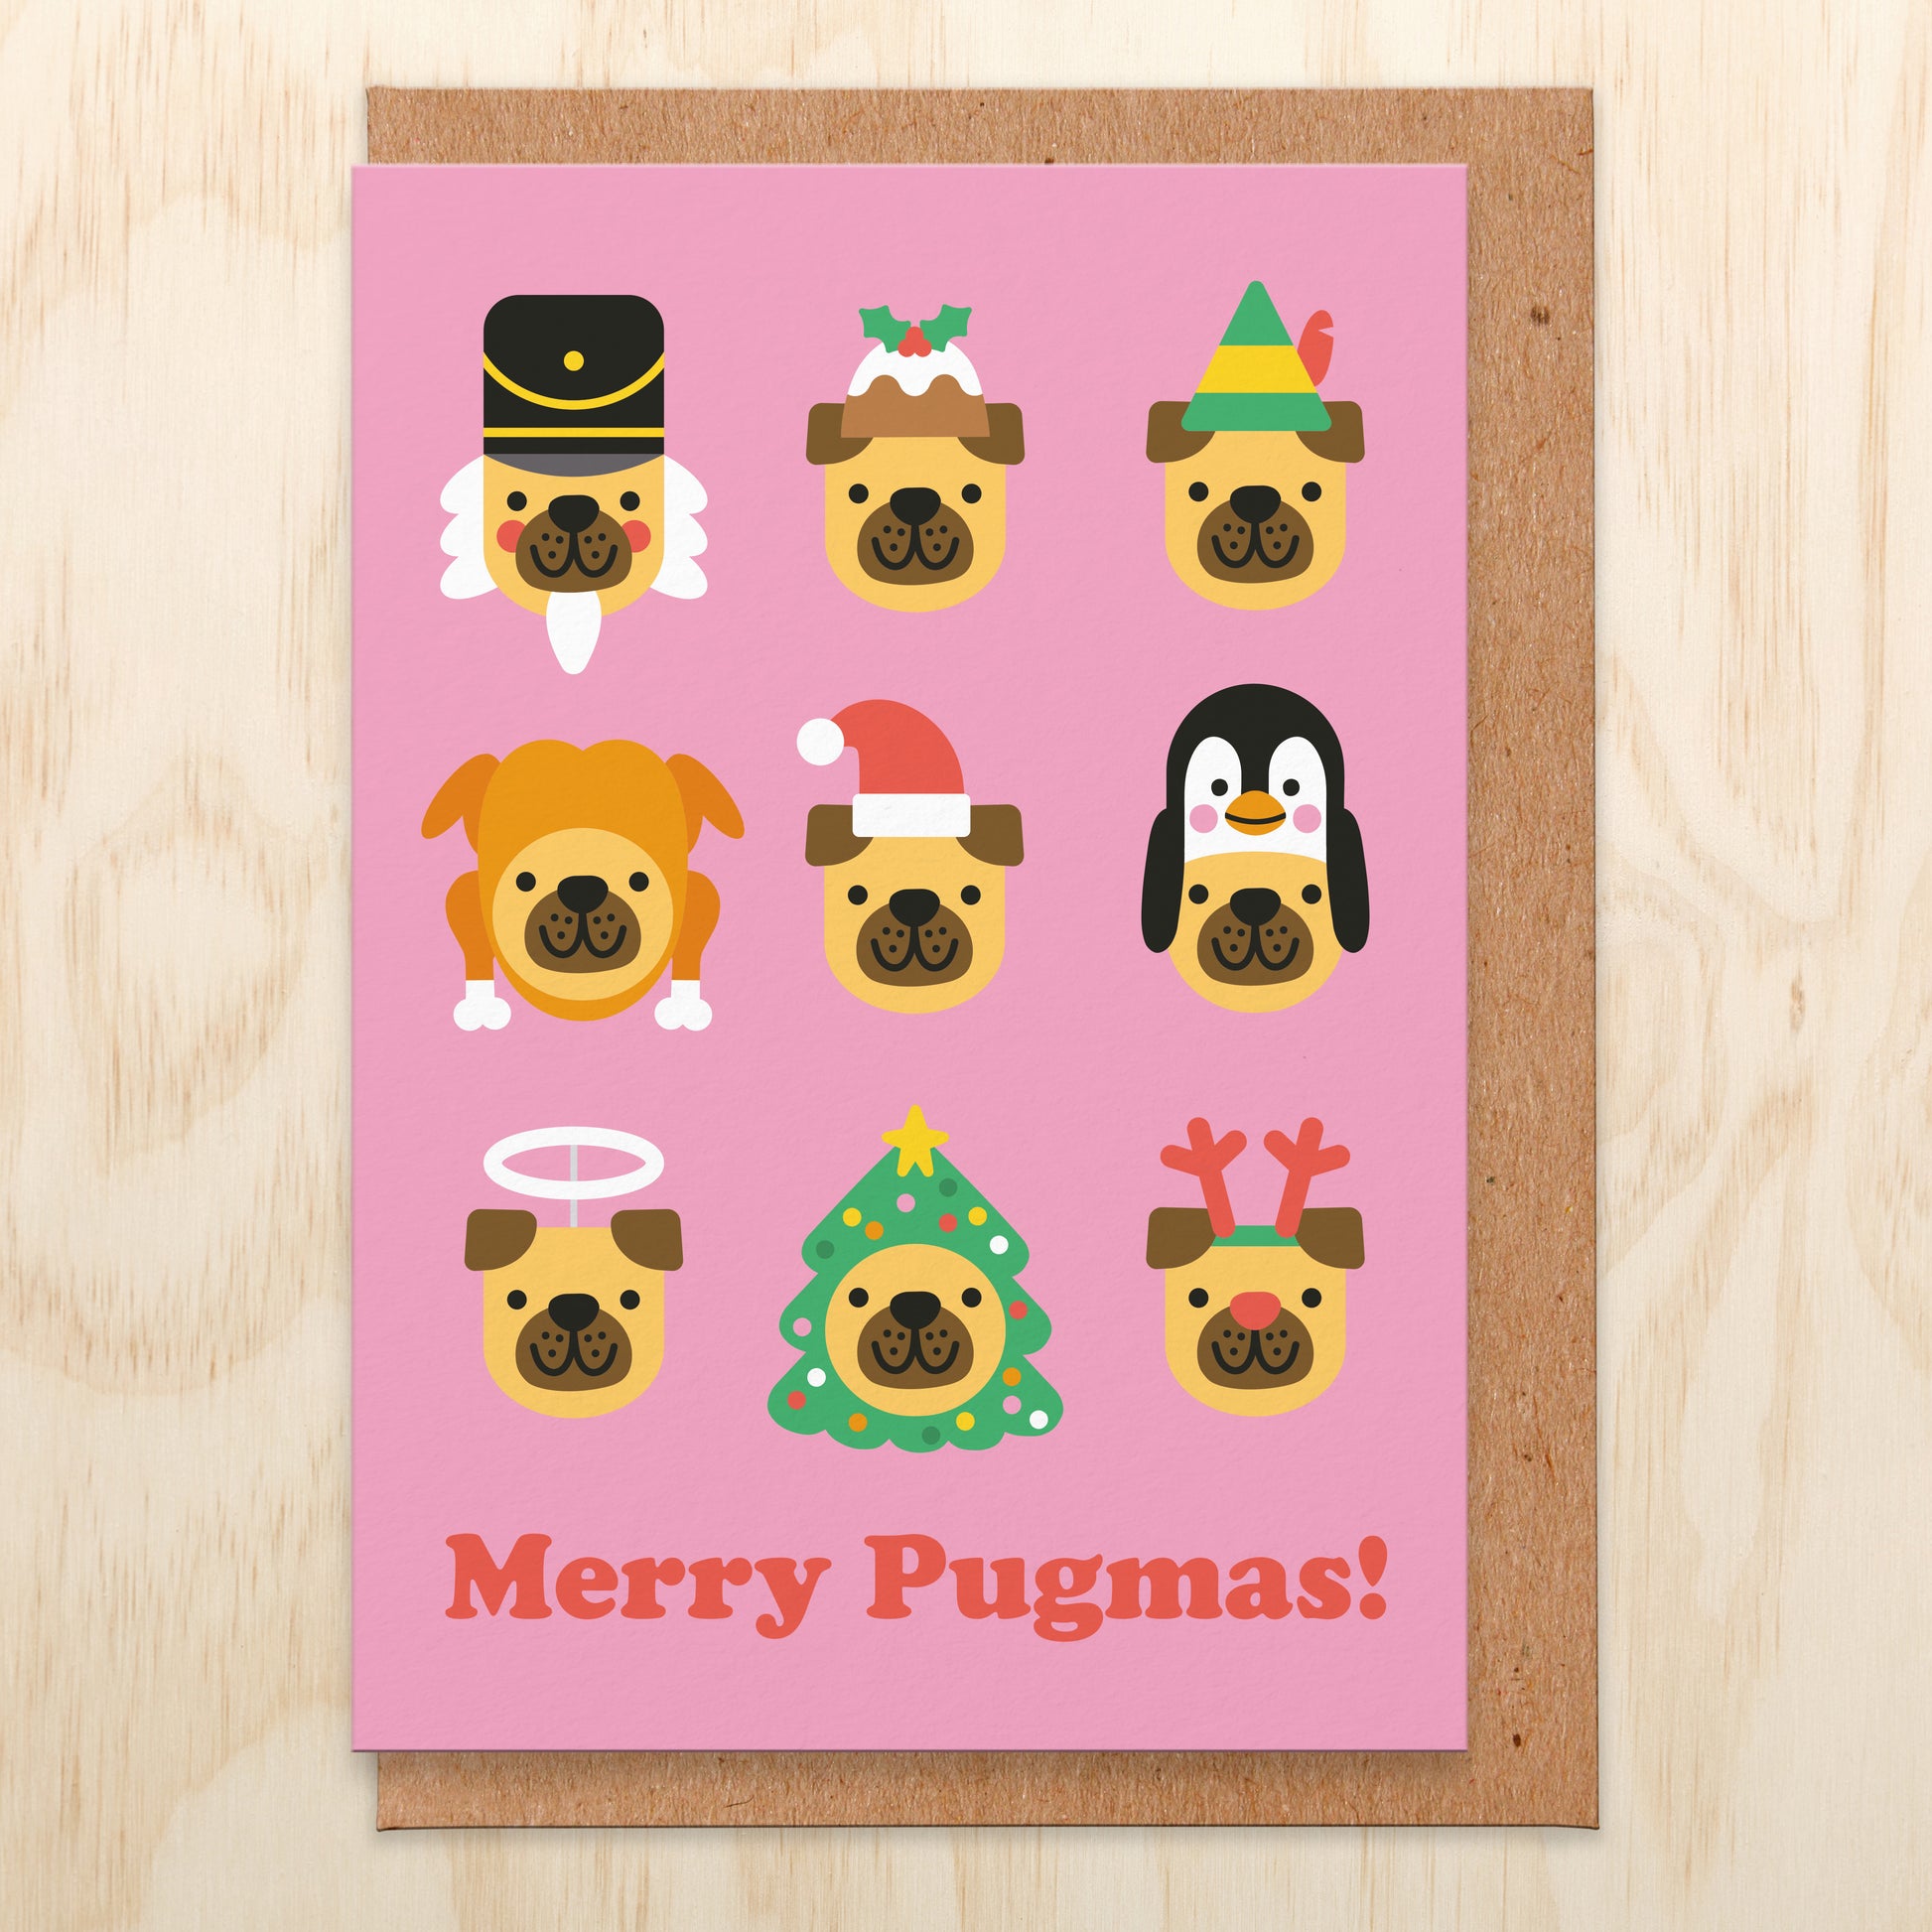 Christmas greetings card with an illustration of 9 pug dogs in different Christmas hats and says Merry Pugmas!